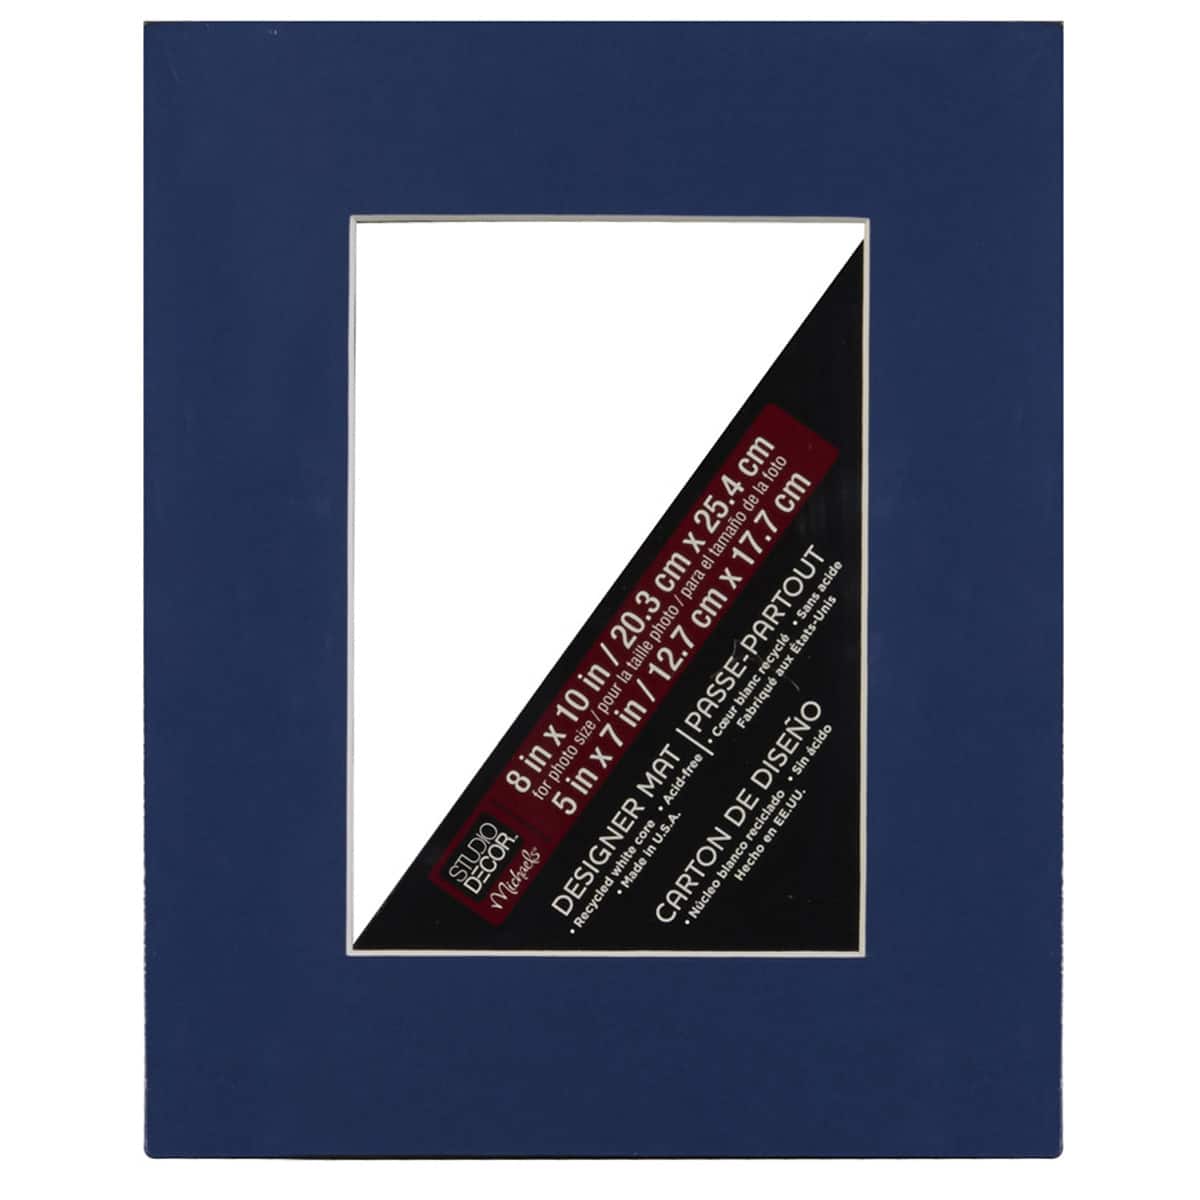  5x7 Mat for 8x10 Frame - Precut Mat Board Acid-Free Show Kit  with Backing Board, and Clear Bags Aqua Blue 5x7 Photo Matte Made to Fit a  8x10 Picture Frame